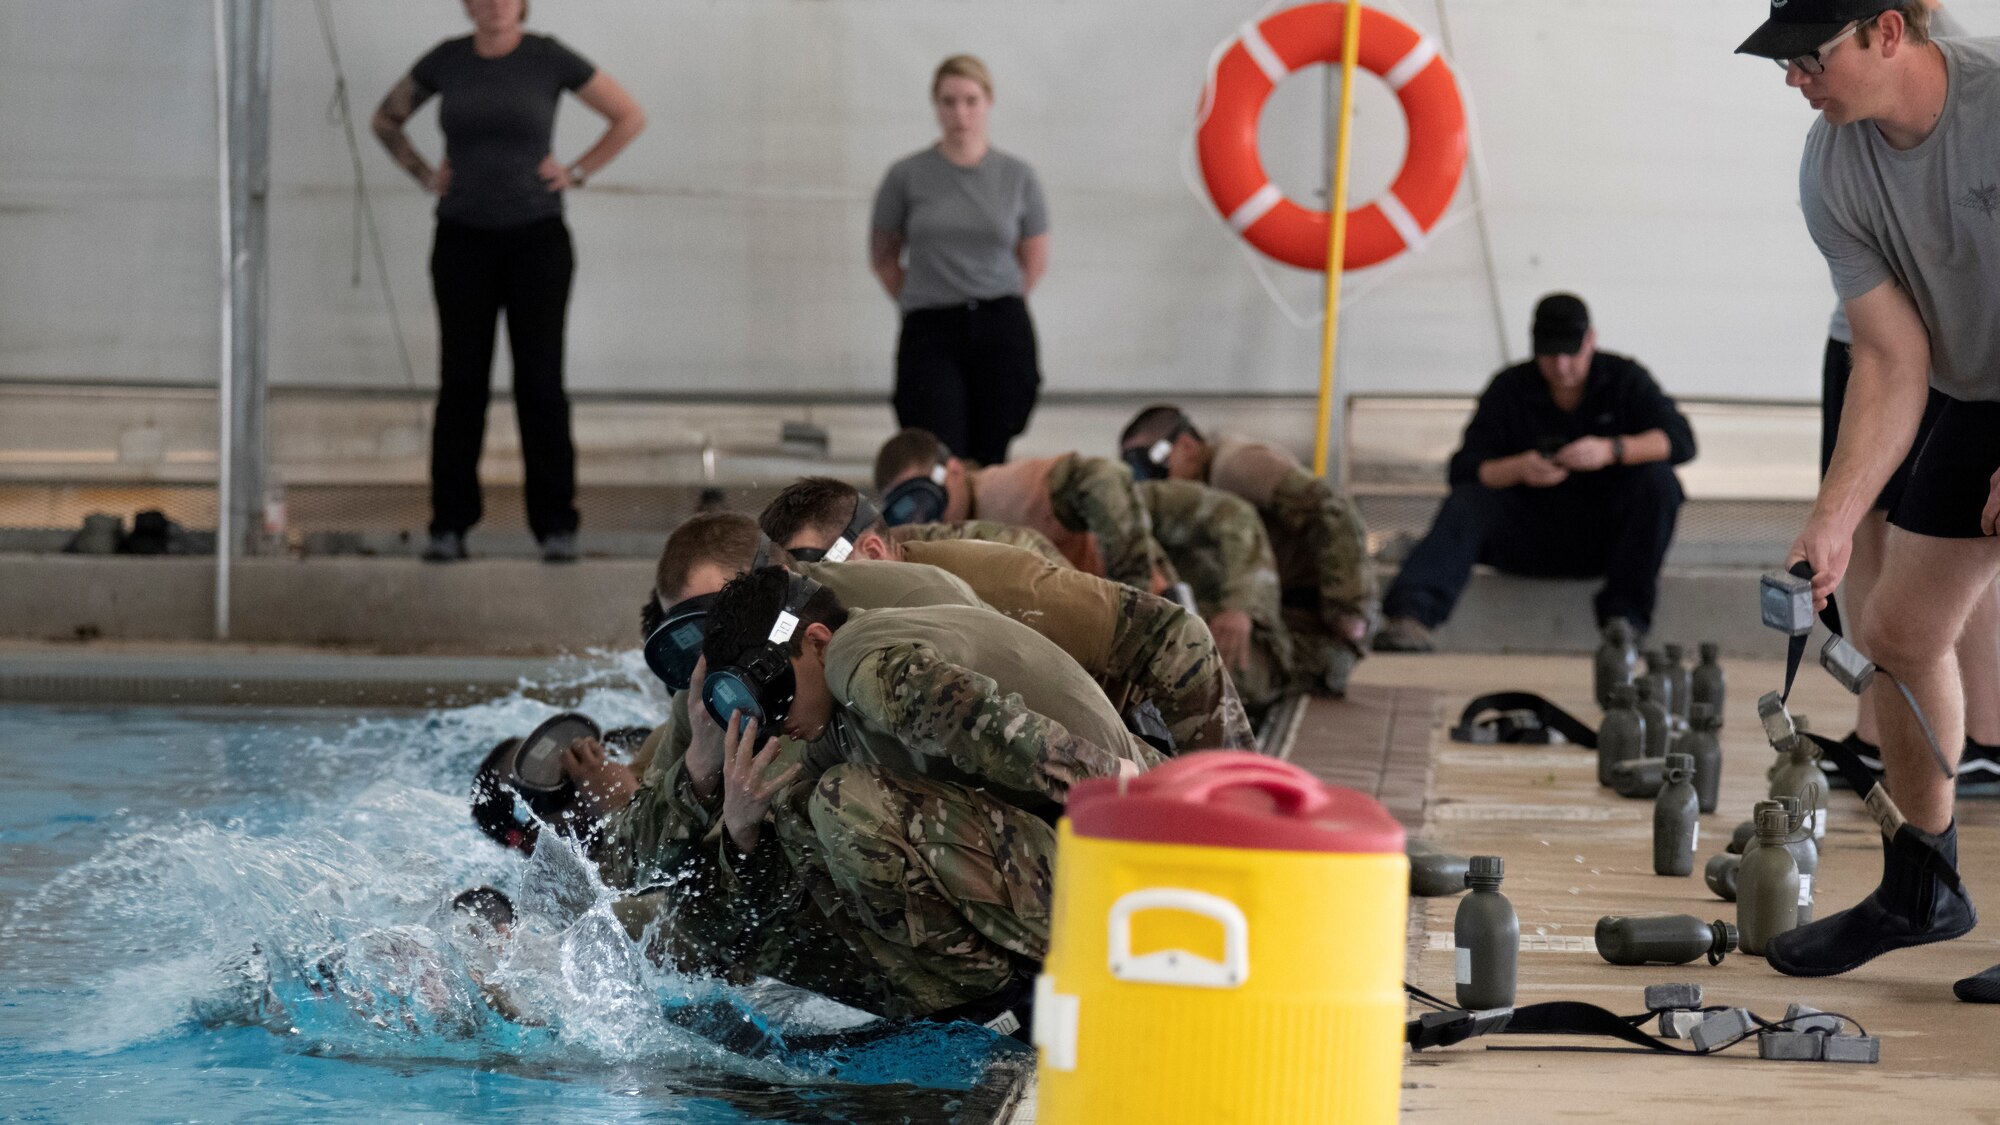 Air Force Special Warfare candidates begin a pool evolution during Assessment and Selection at Chaparral Pool on Joint Base Lackland-San Antonio, Texas, Mar. 15, 2022. One third of graduates from the Special Warfare Training Wing pipelines will feed directly into operational AFSOC units, to include Combat Controllers, Special Reconnaissance Airmen, Special Tactics Officers, and some Pararescuemen.